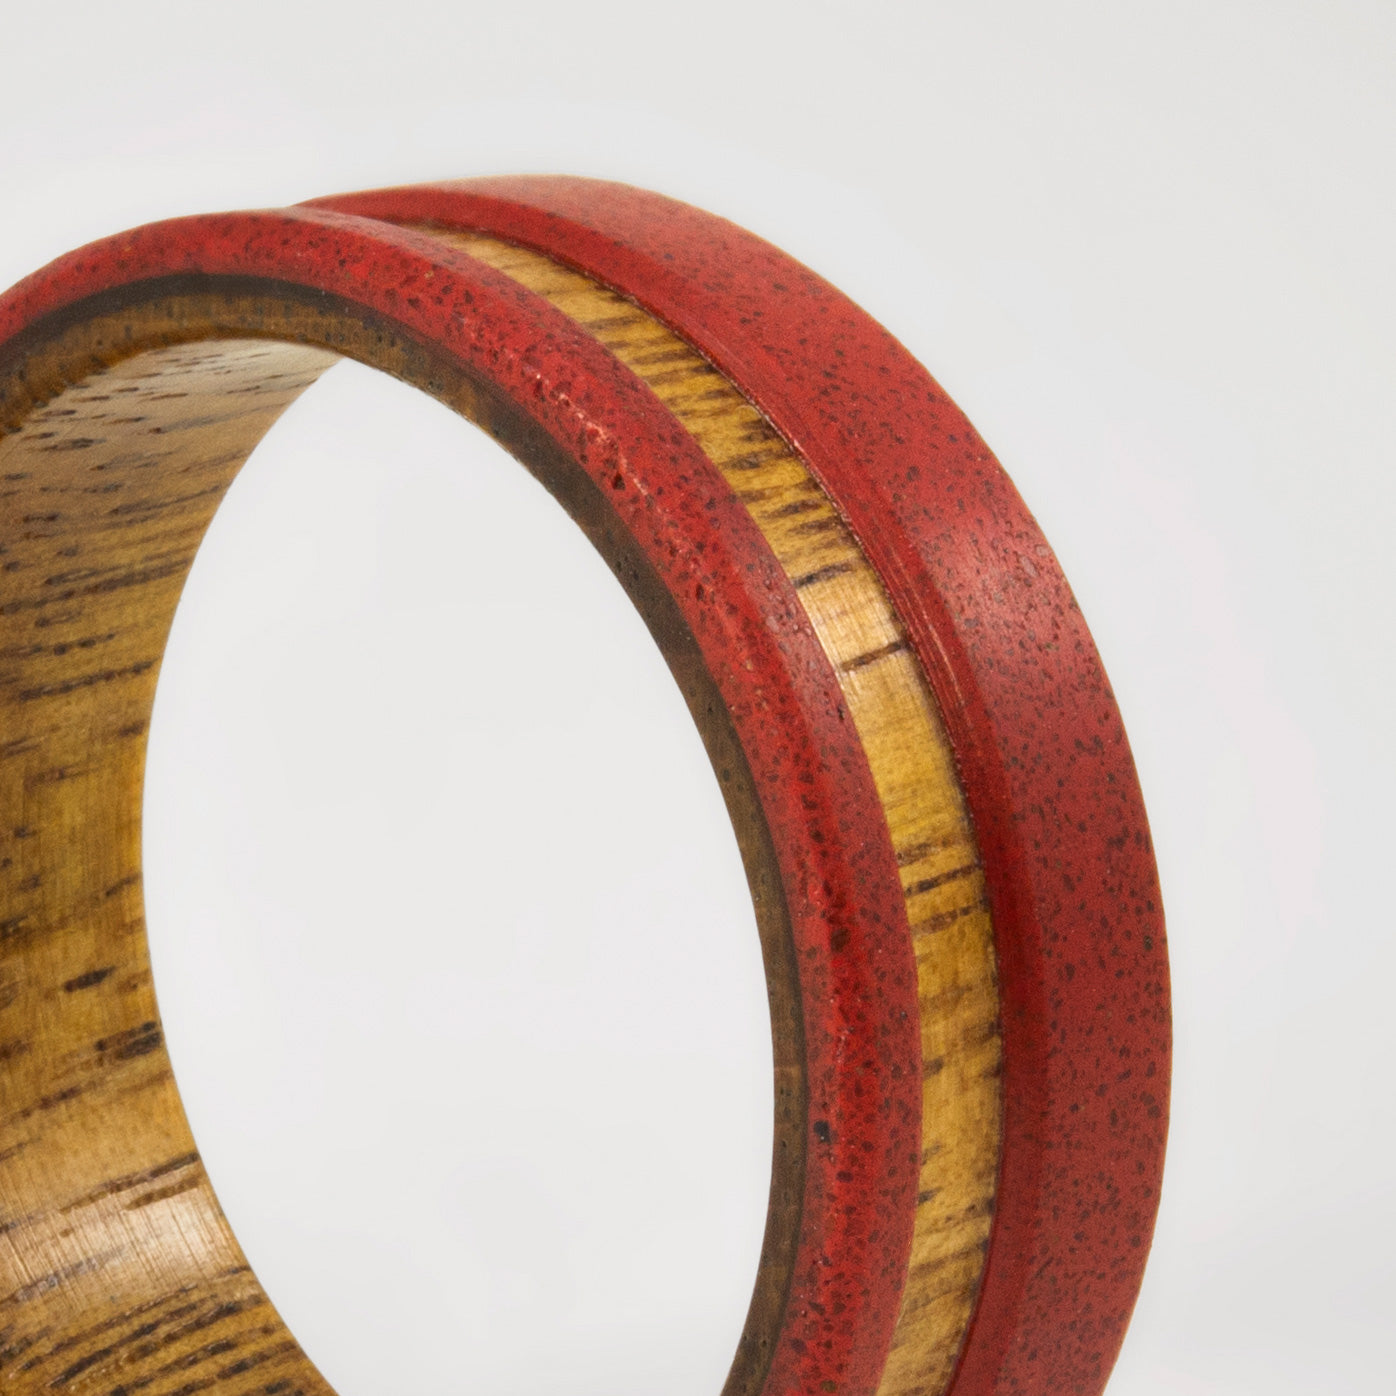 RED CONCRETE and WOOD ring